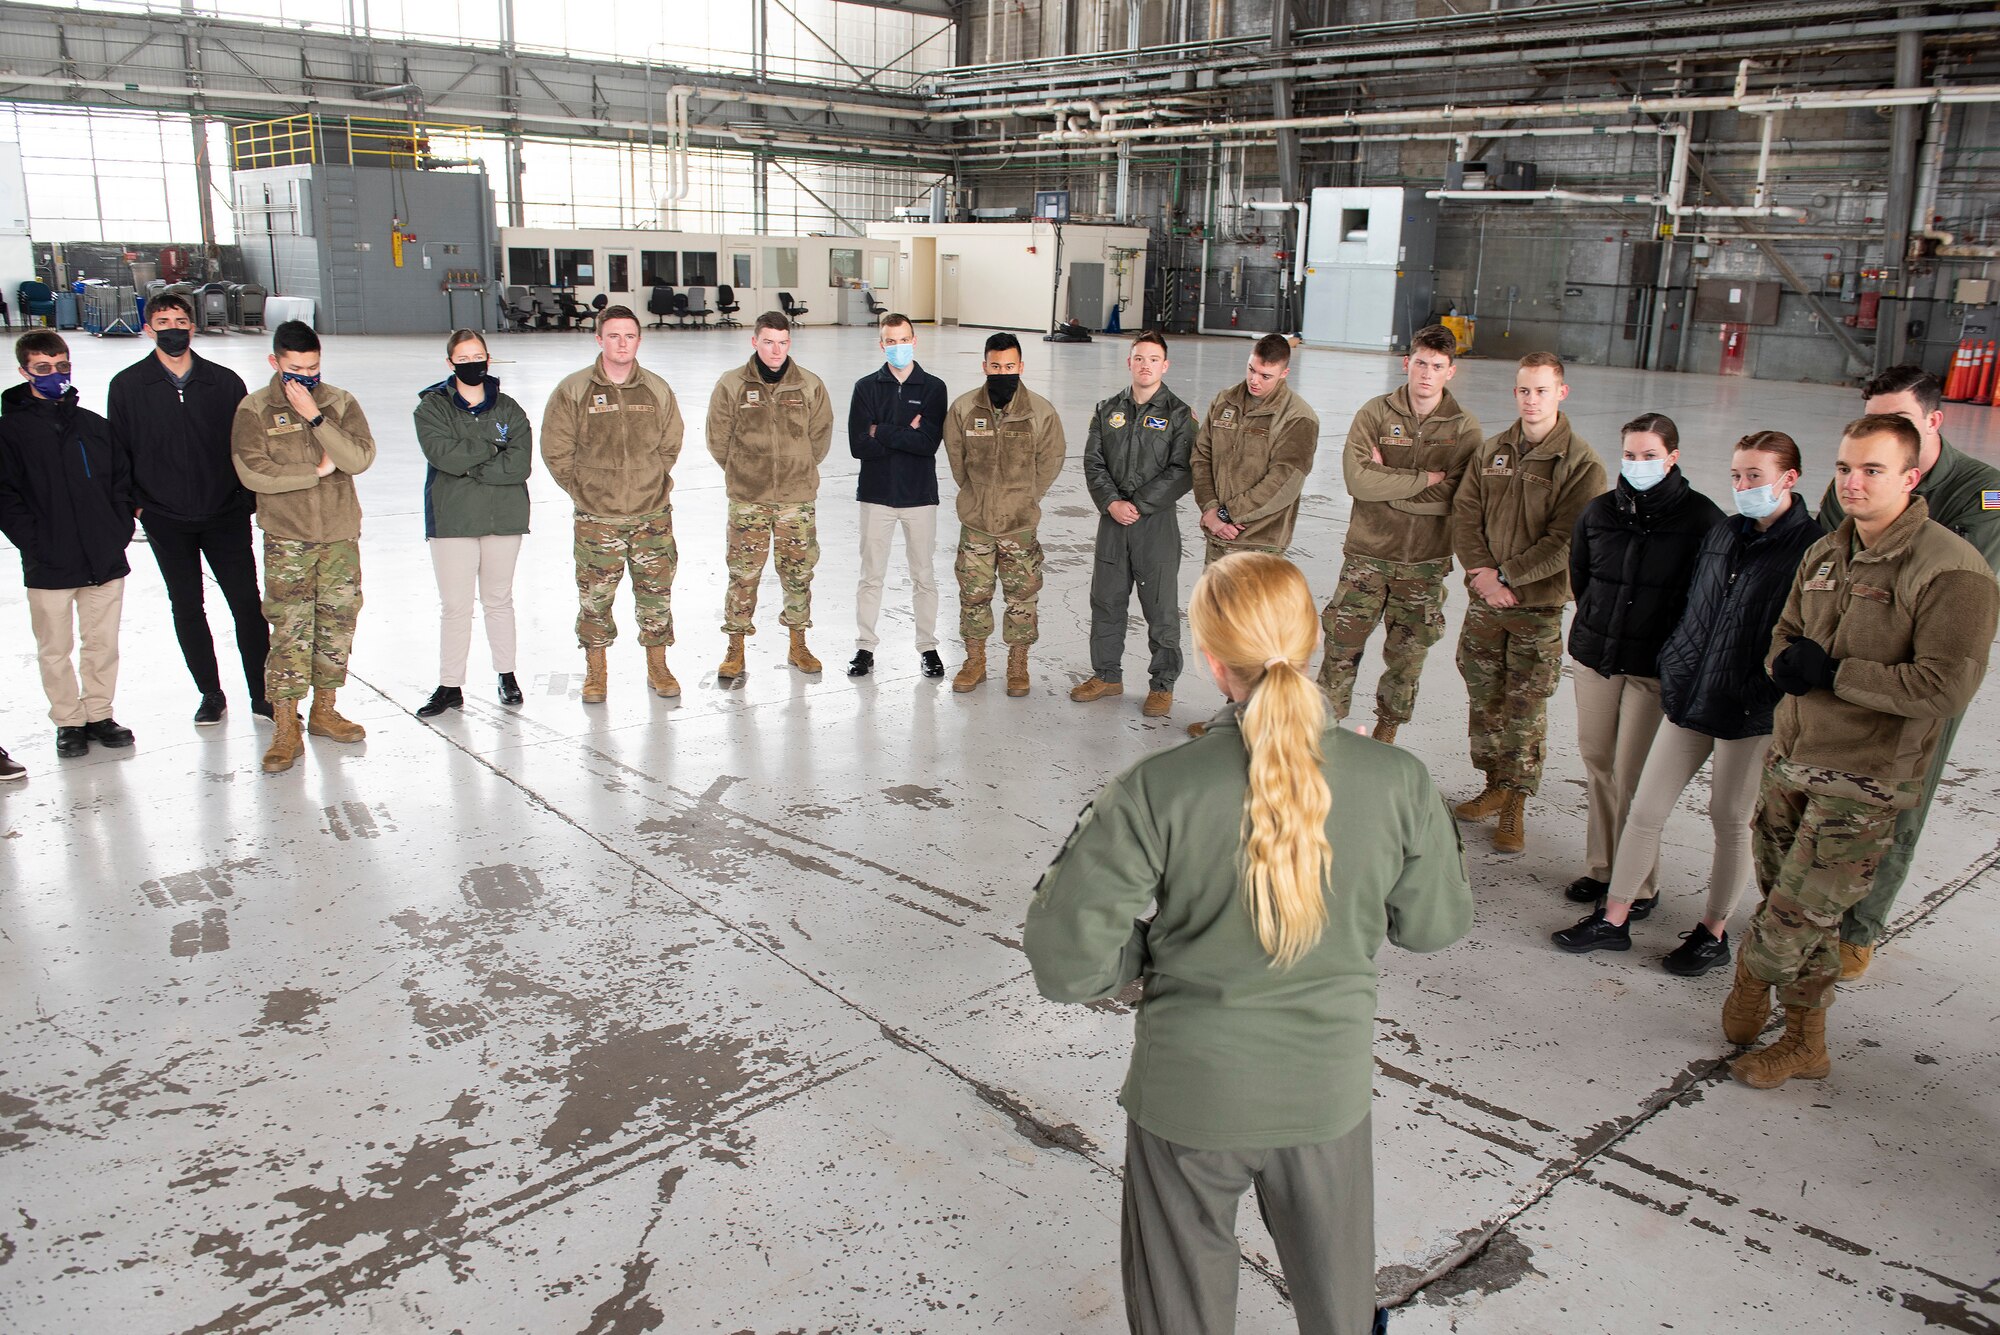 Maj. Sarah Kociuba, 393rd Bomb Squadron pilot, visits with Air Force ROTC cadets of Detachment 643 on Nov. 15, 2021, in a hangar at Wright-Patterson Air Force Base, Ohio. The University of Dayton alum came back to Wright-Patt to talk with students from her old ROTC unit about the transition from cadet to Air Force officer. (U.S. Air Force photo by R.J. Oriez)